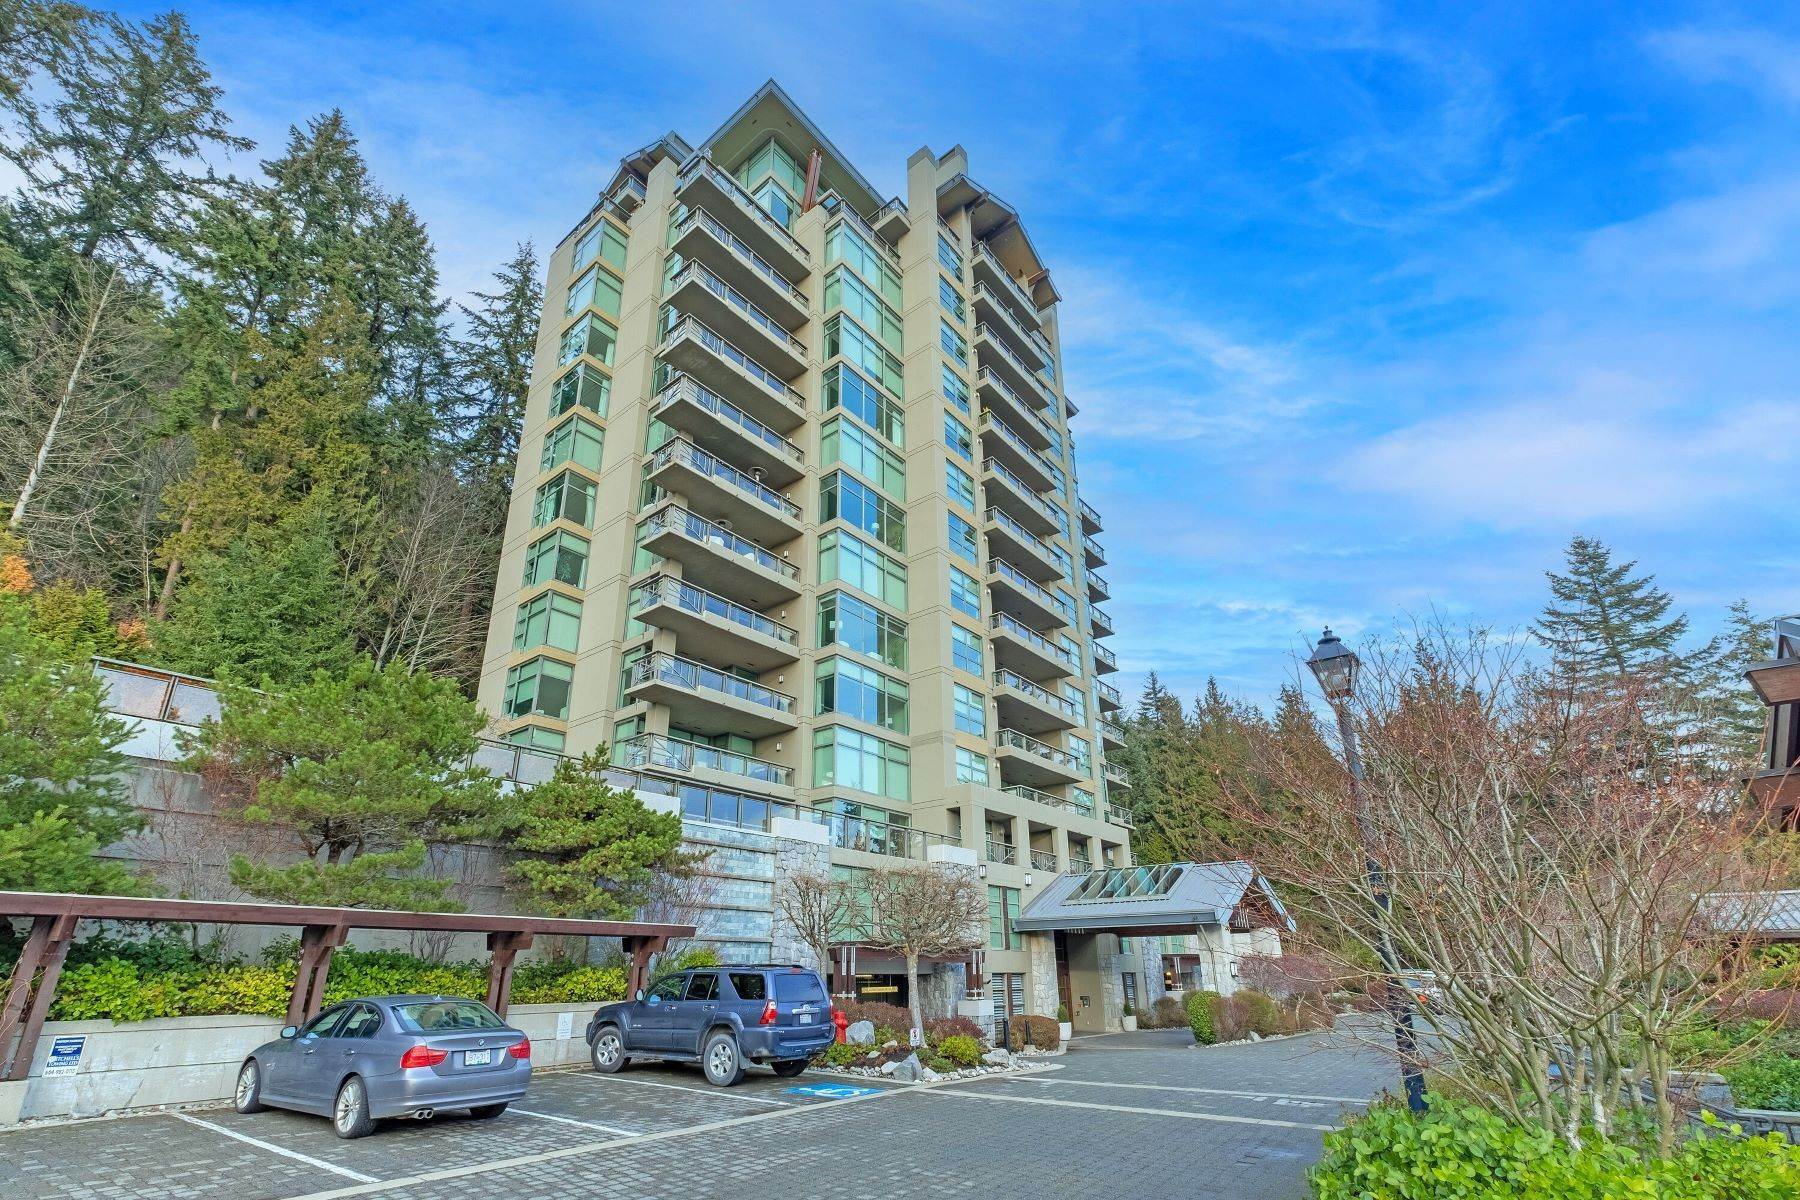 30. Condominiums for Sale at Cypress Place Estates 3315 Cypress Place 401 West Vancouver, British Columbia V7S 3J7 Canada